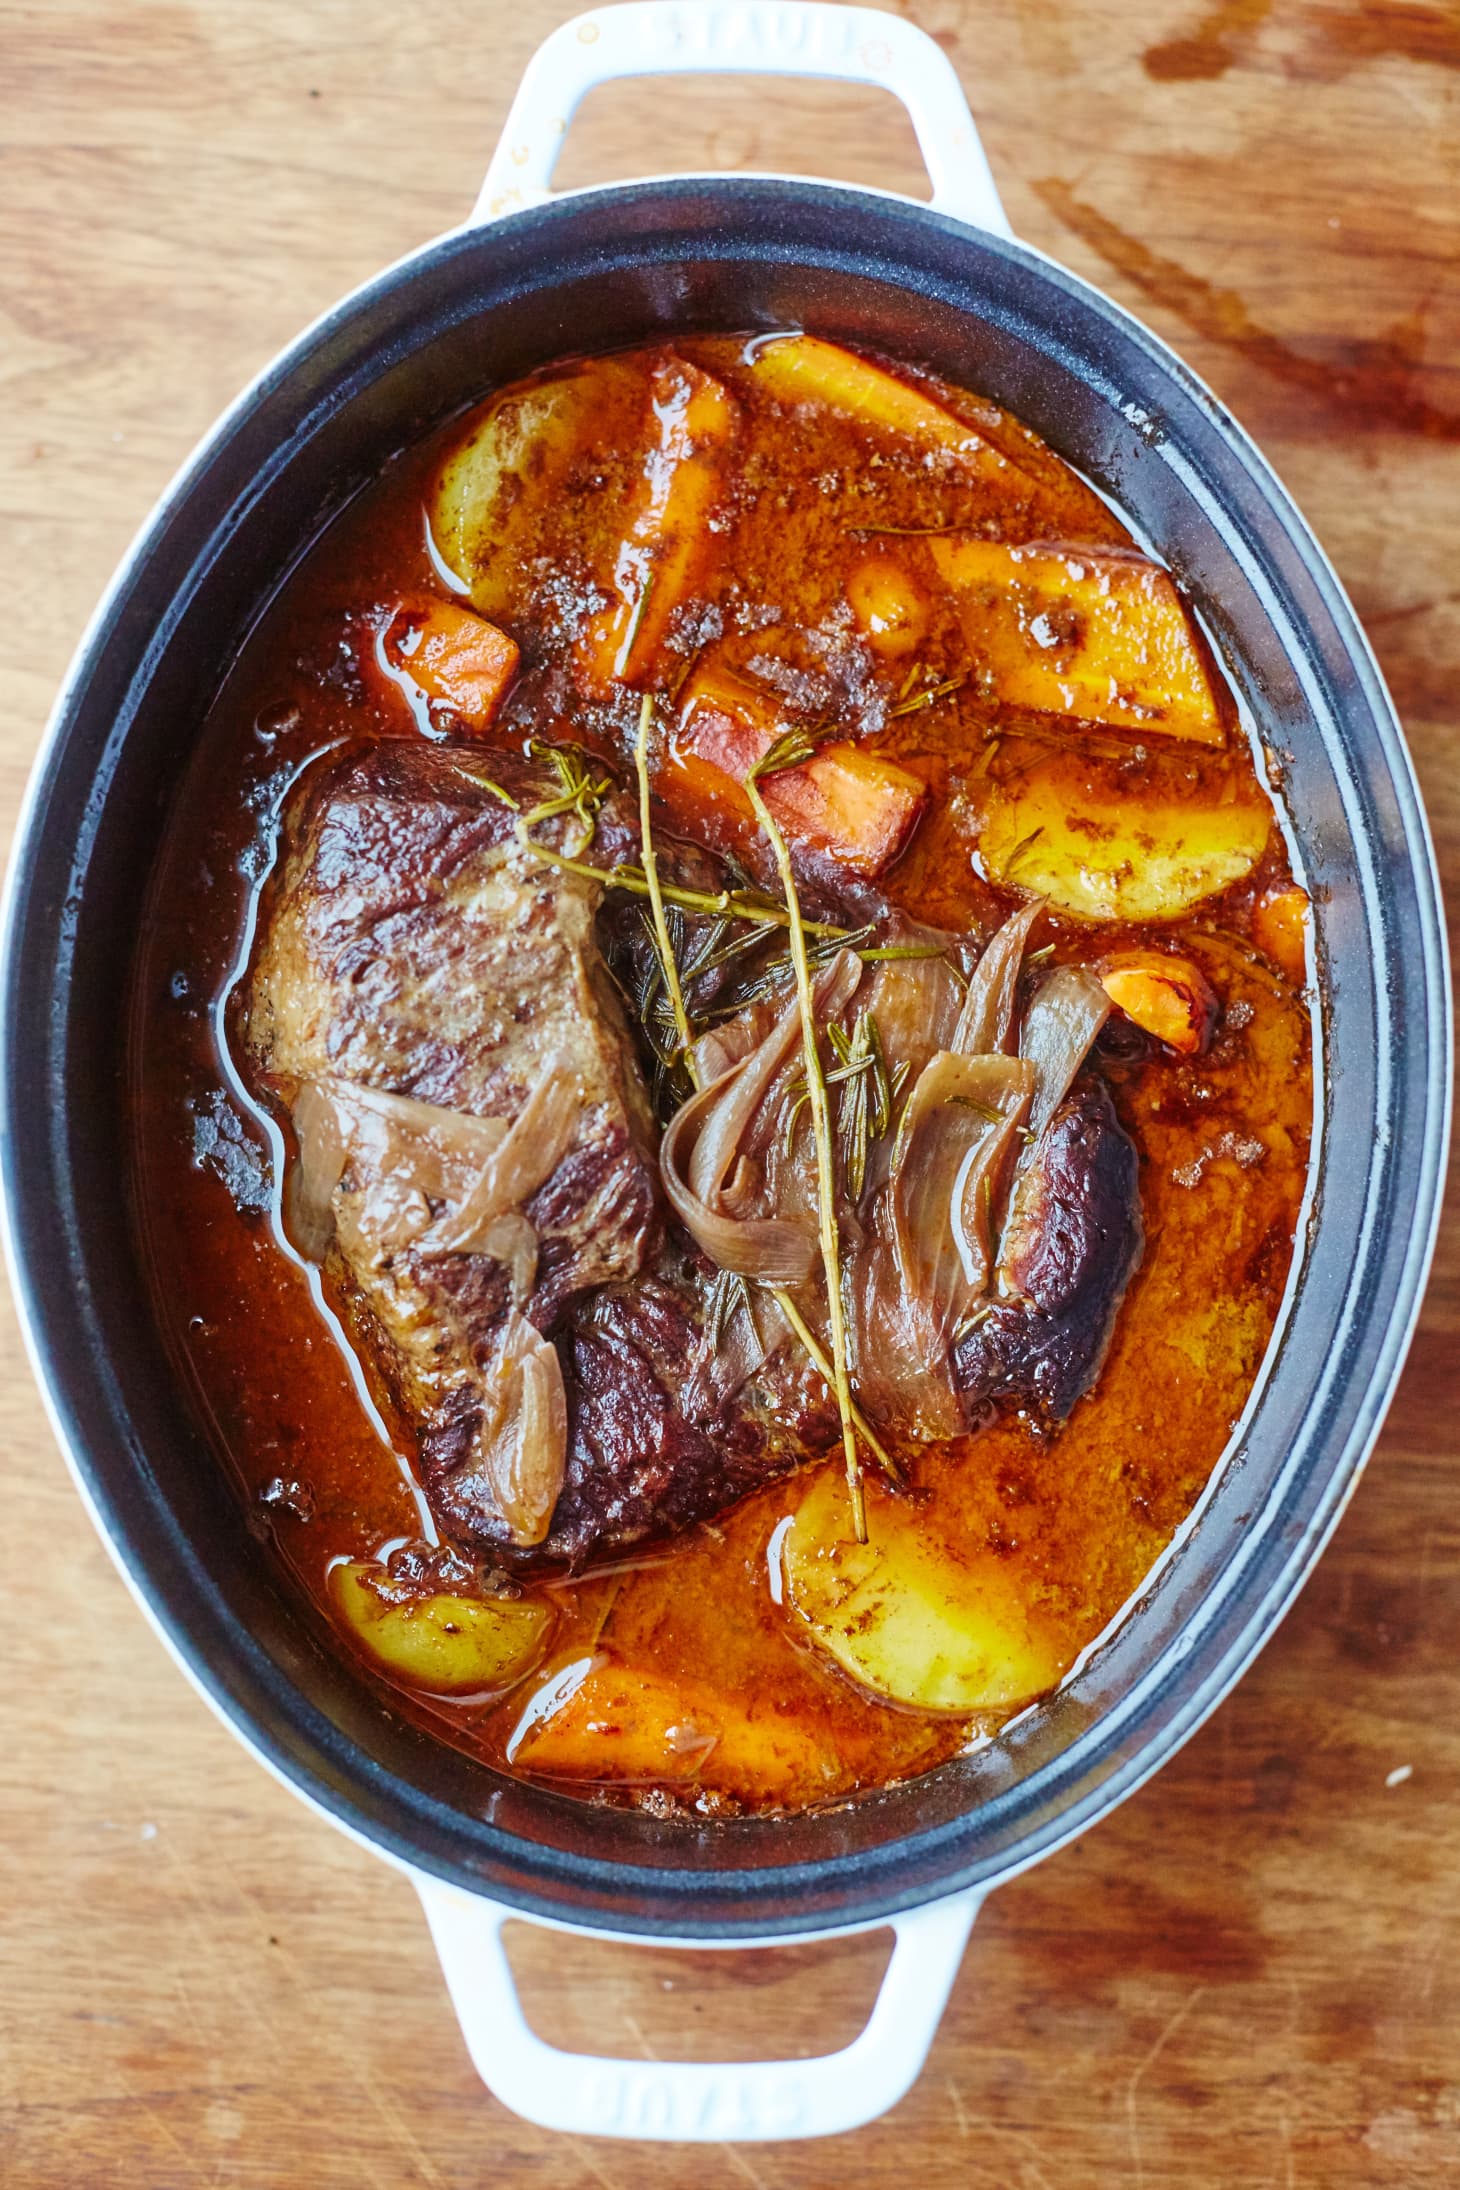 How To Cook Classic Beef Pot Roast in the Oven | Kitchn